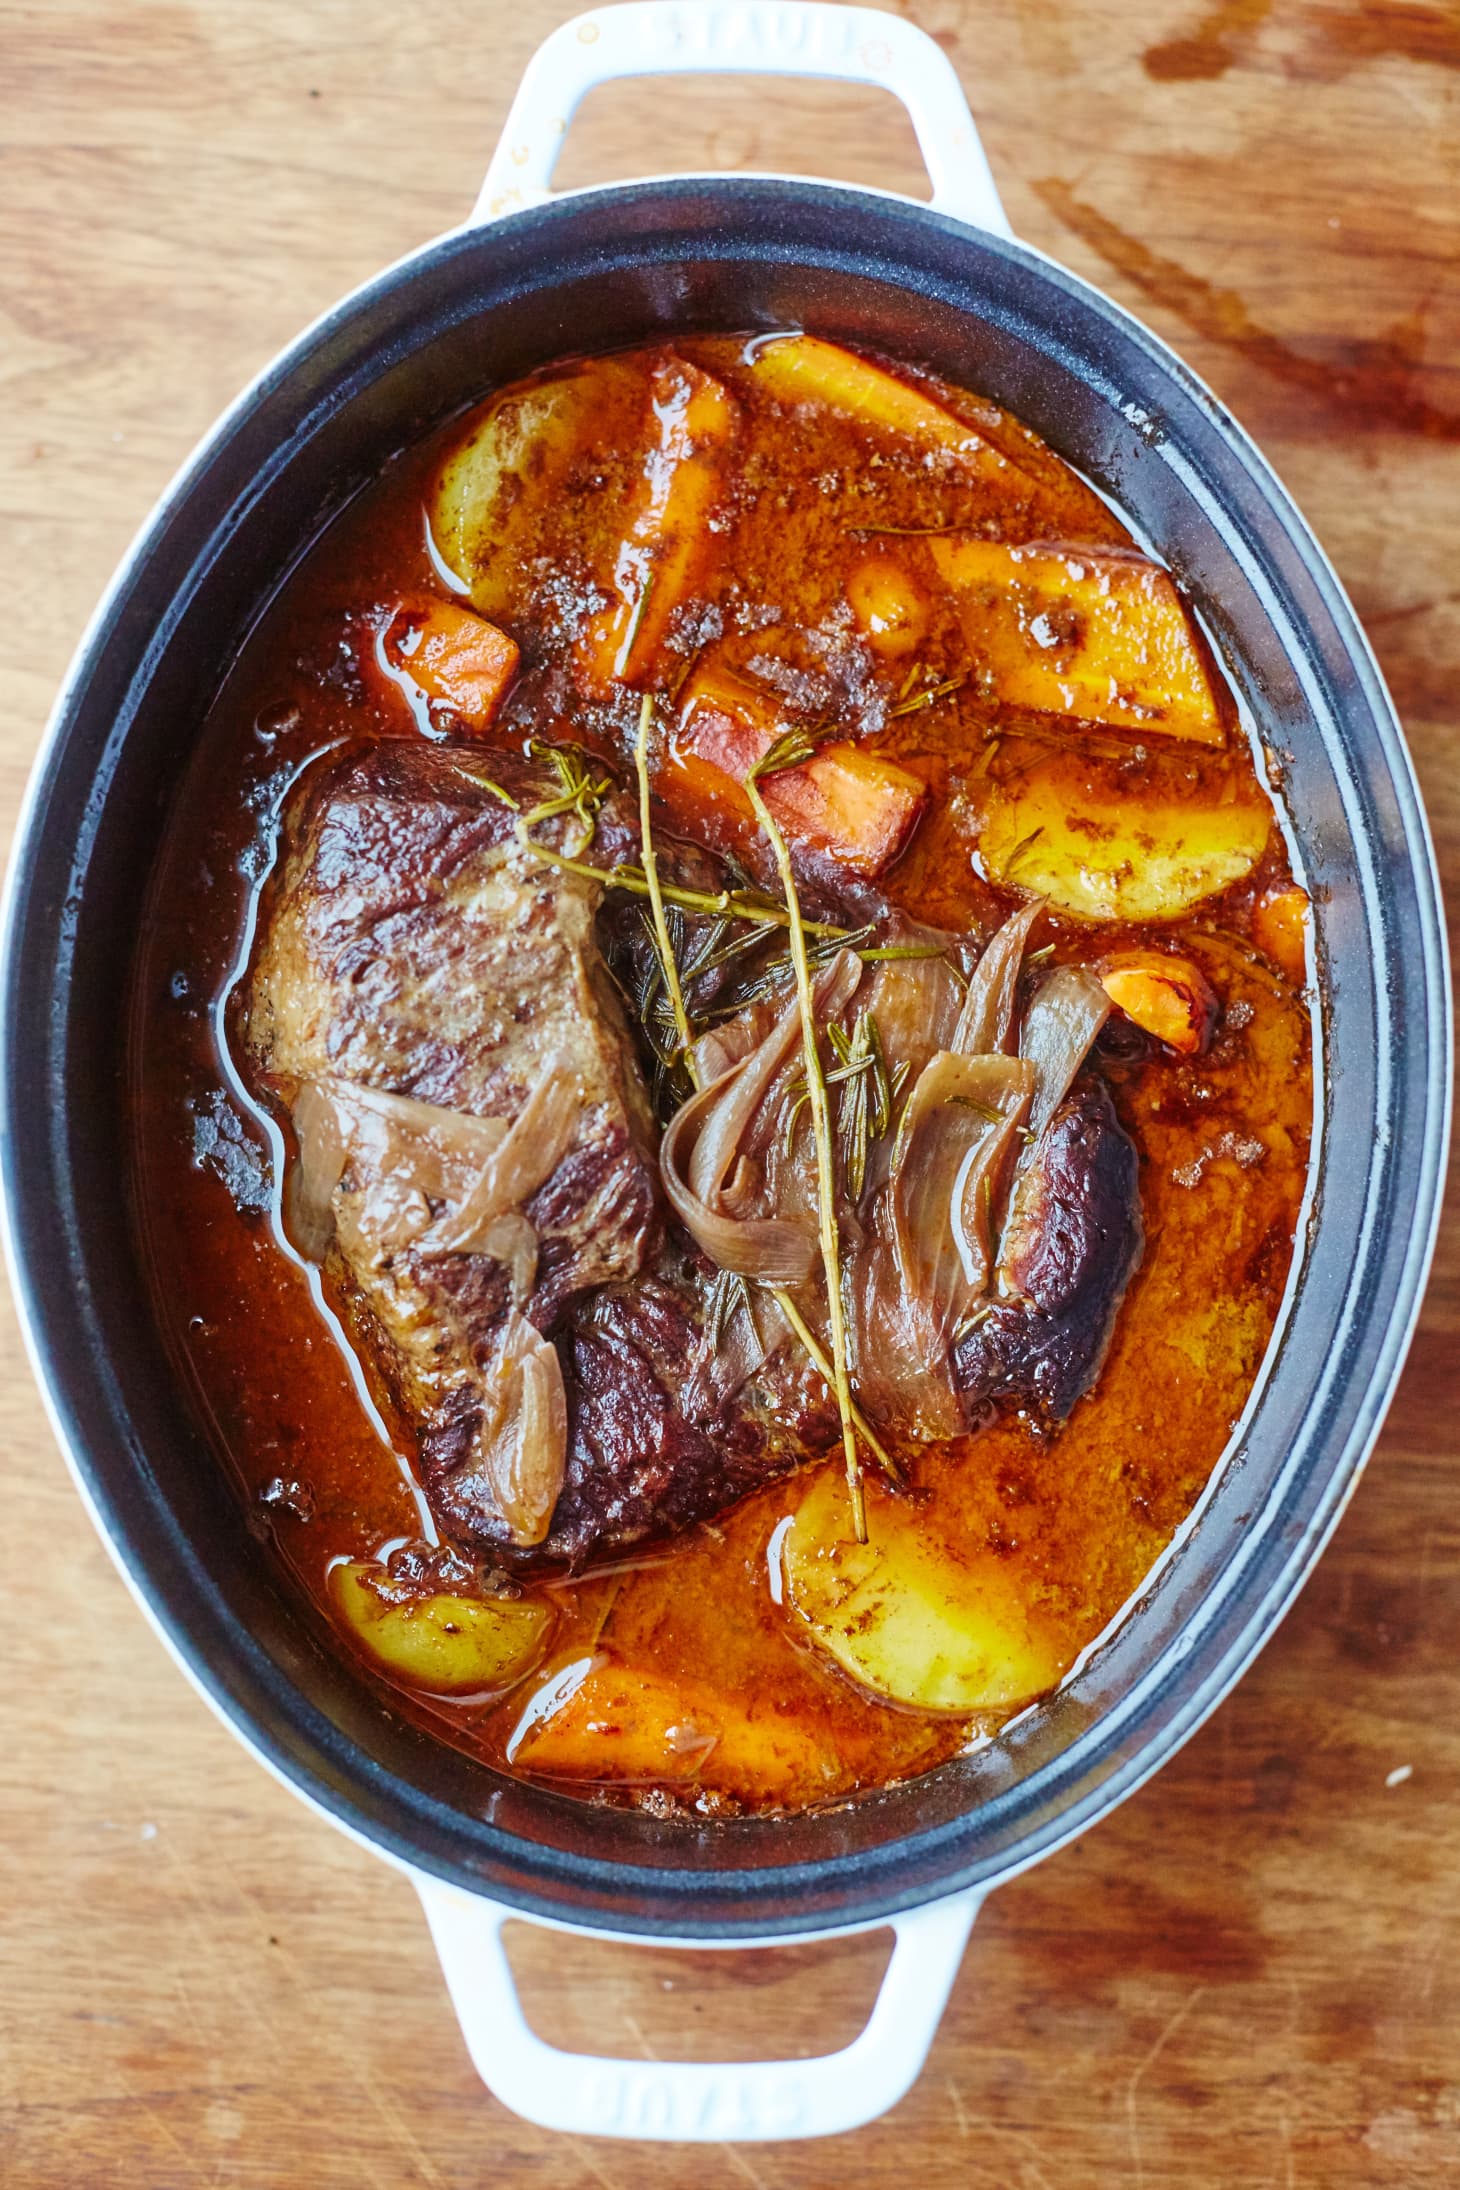 How To Cook Classic Beef Pot Roast in the Oven | Kitchn